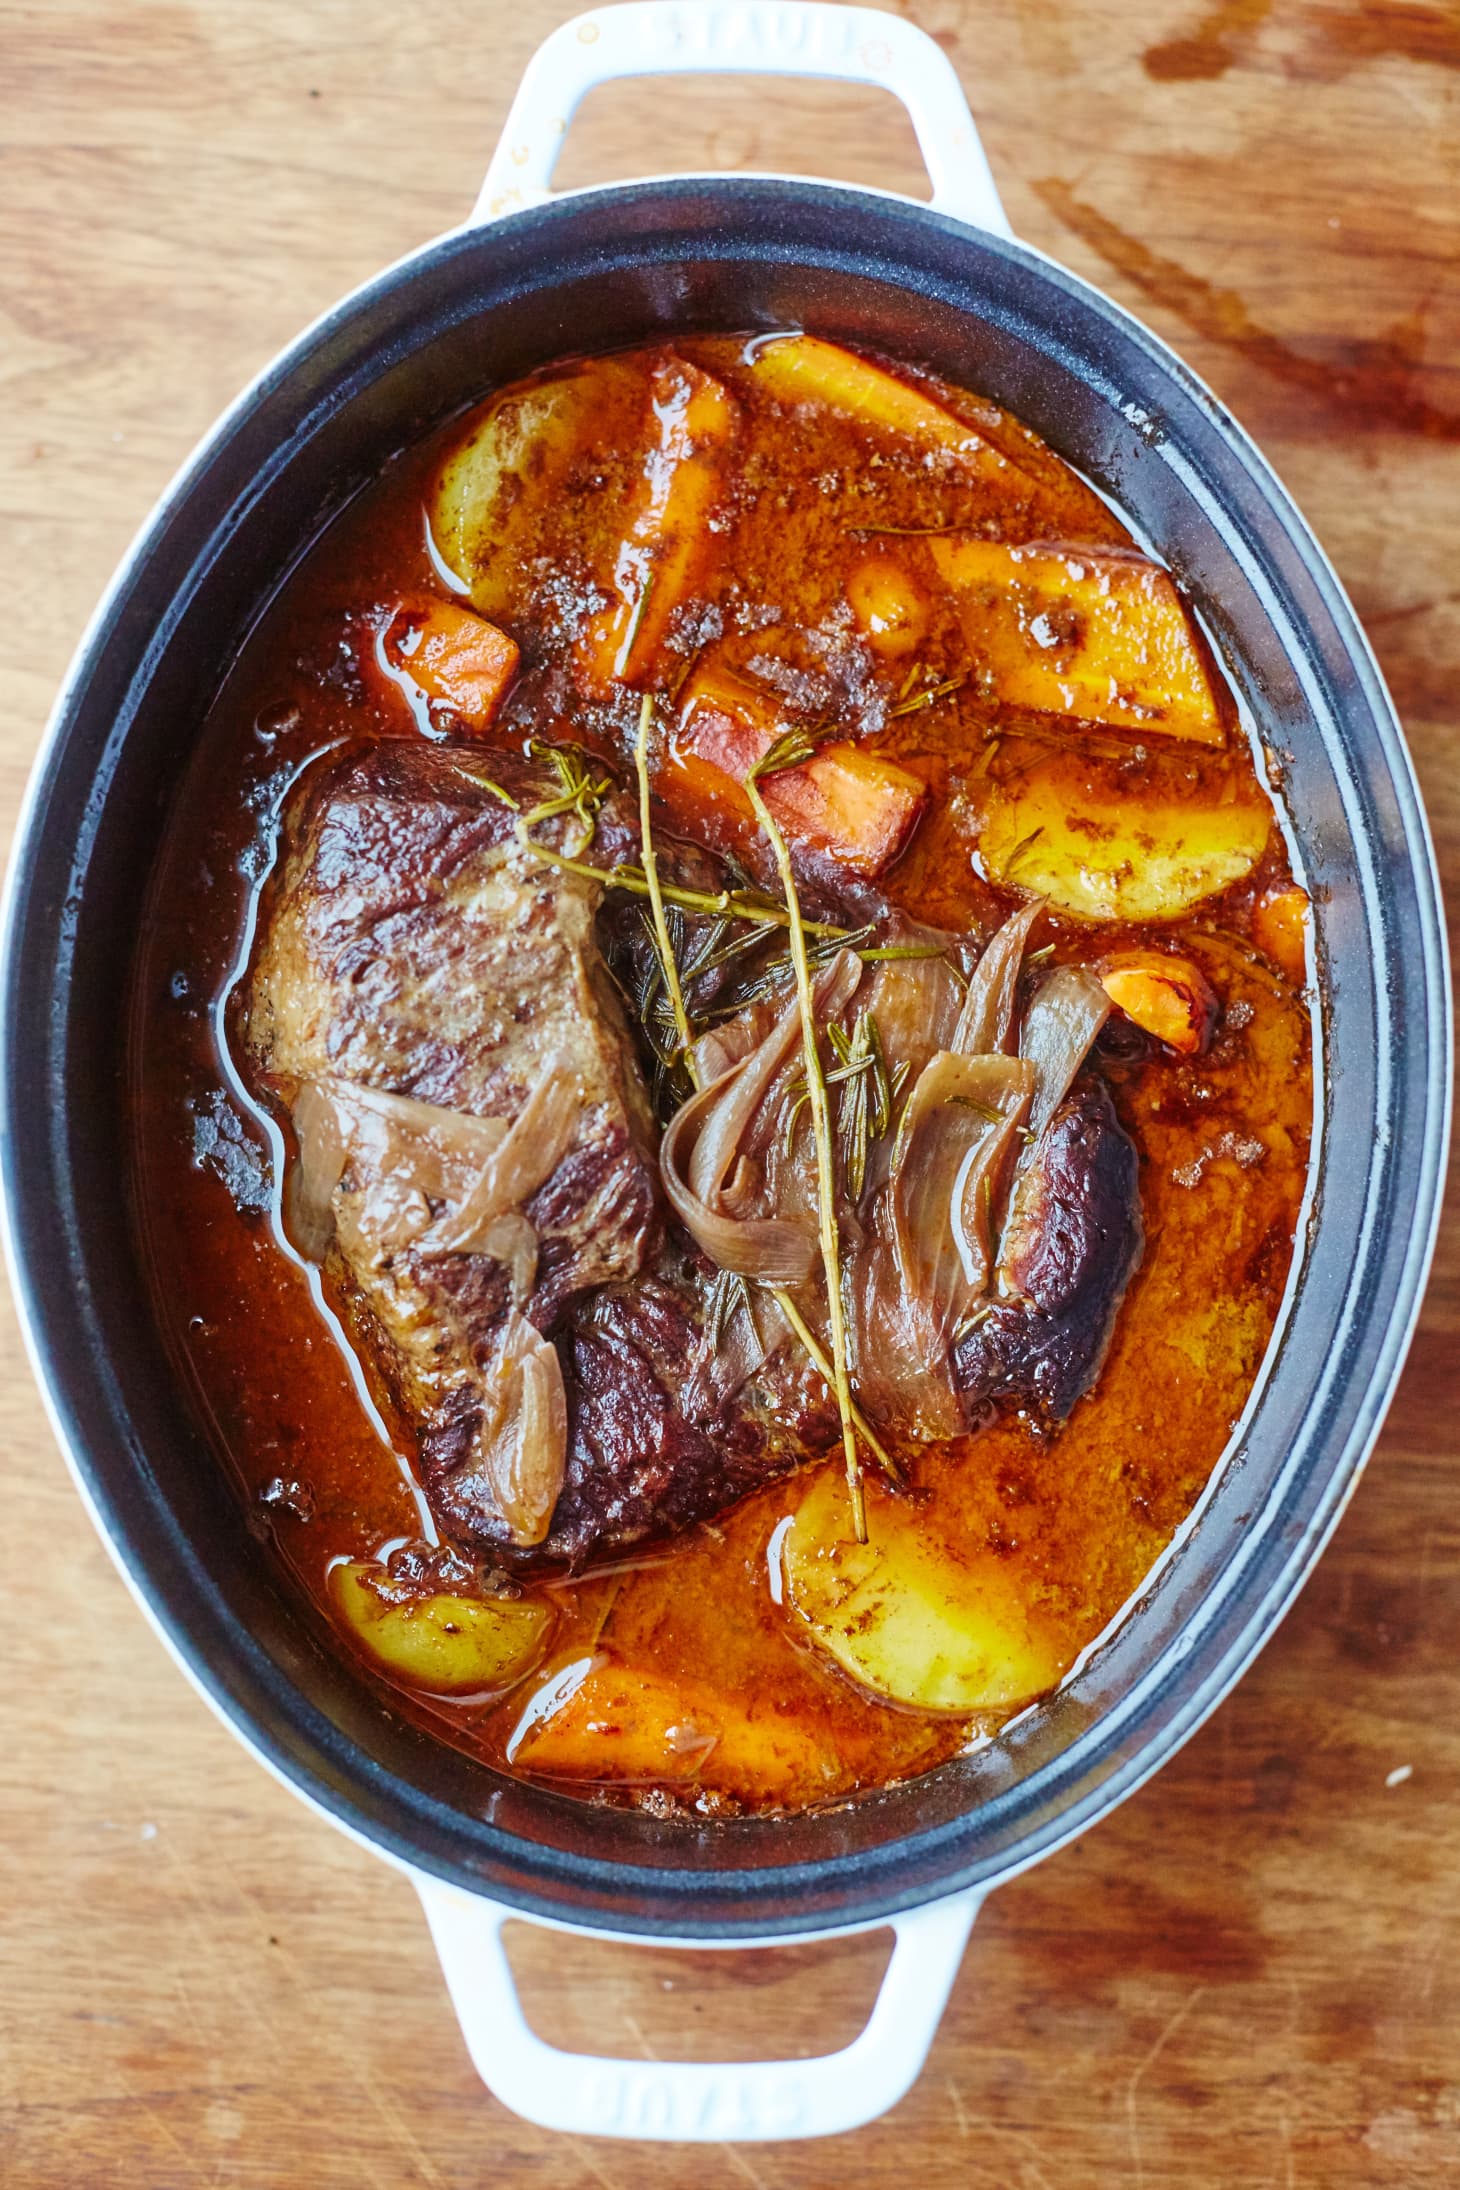 How To Cook Classic Beef Pot Roast in the Oven | Kitchn